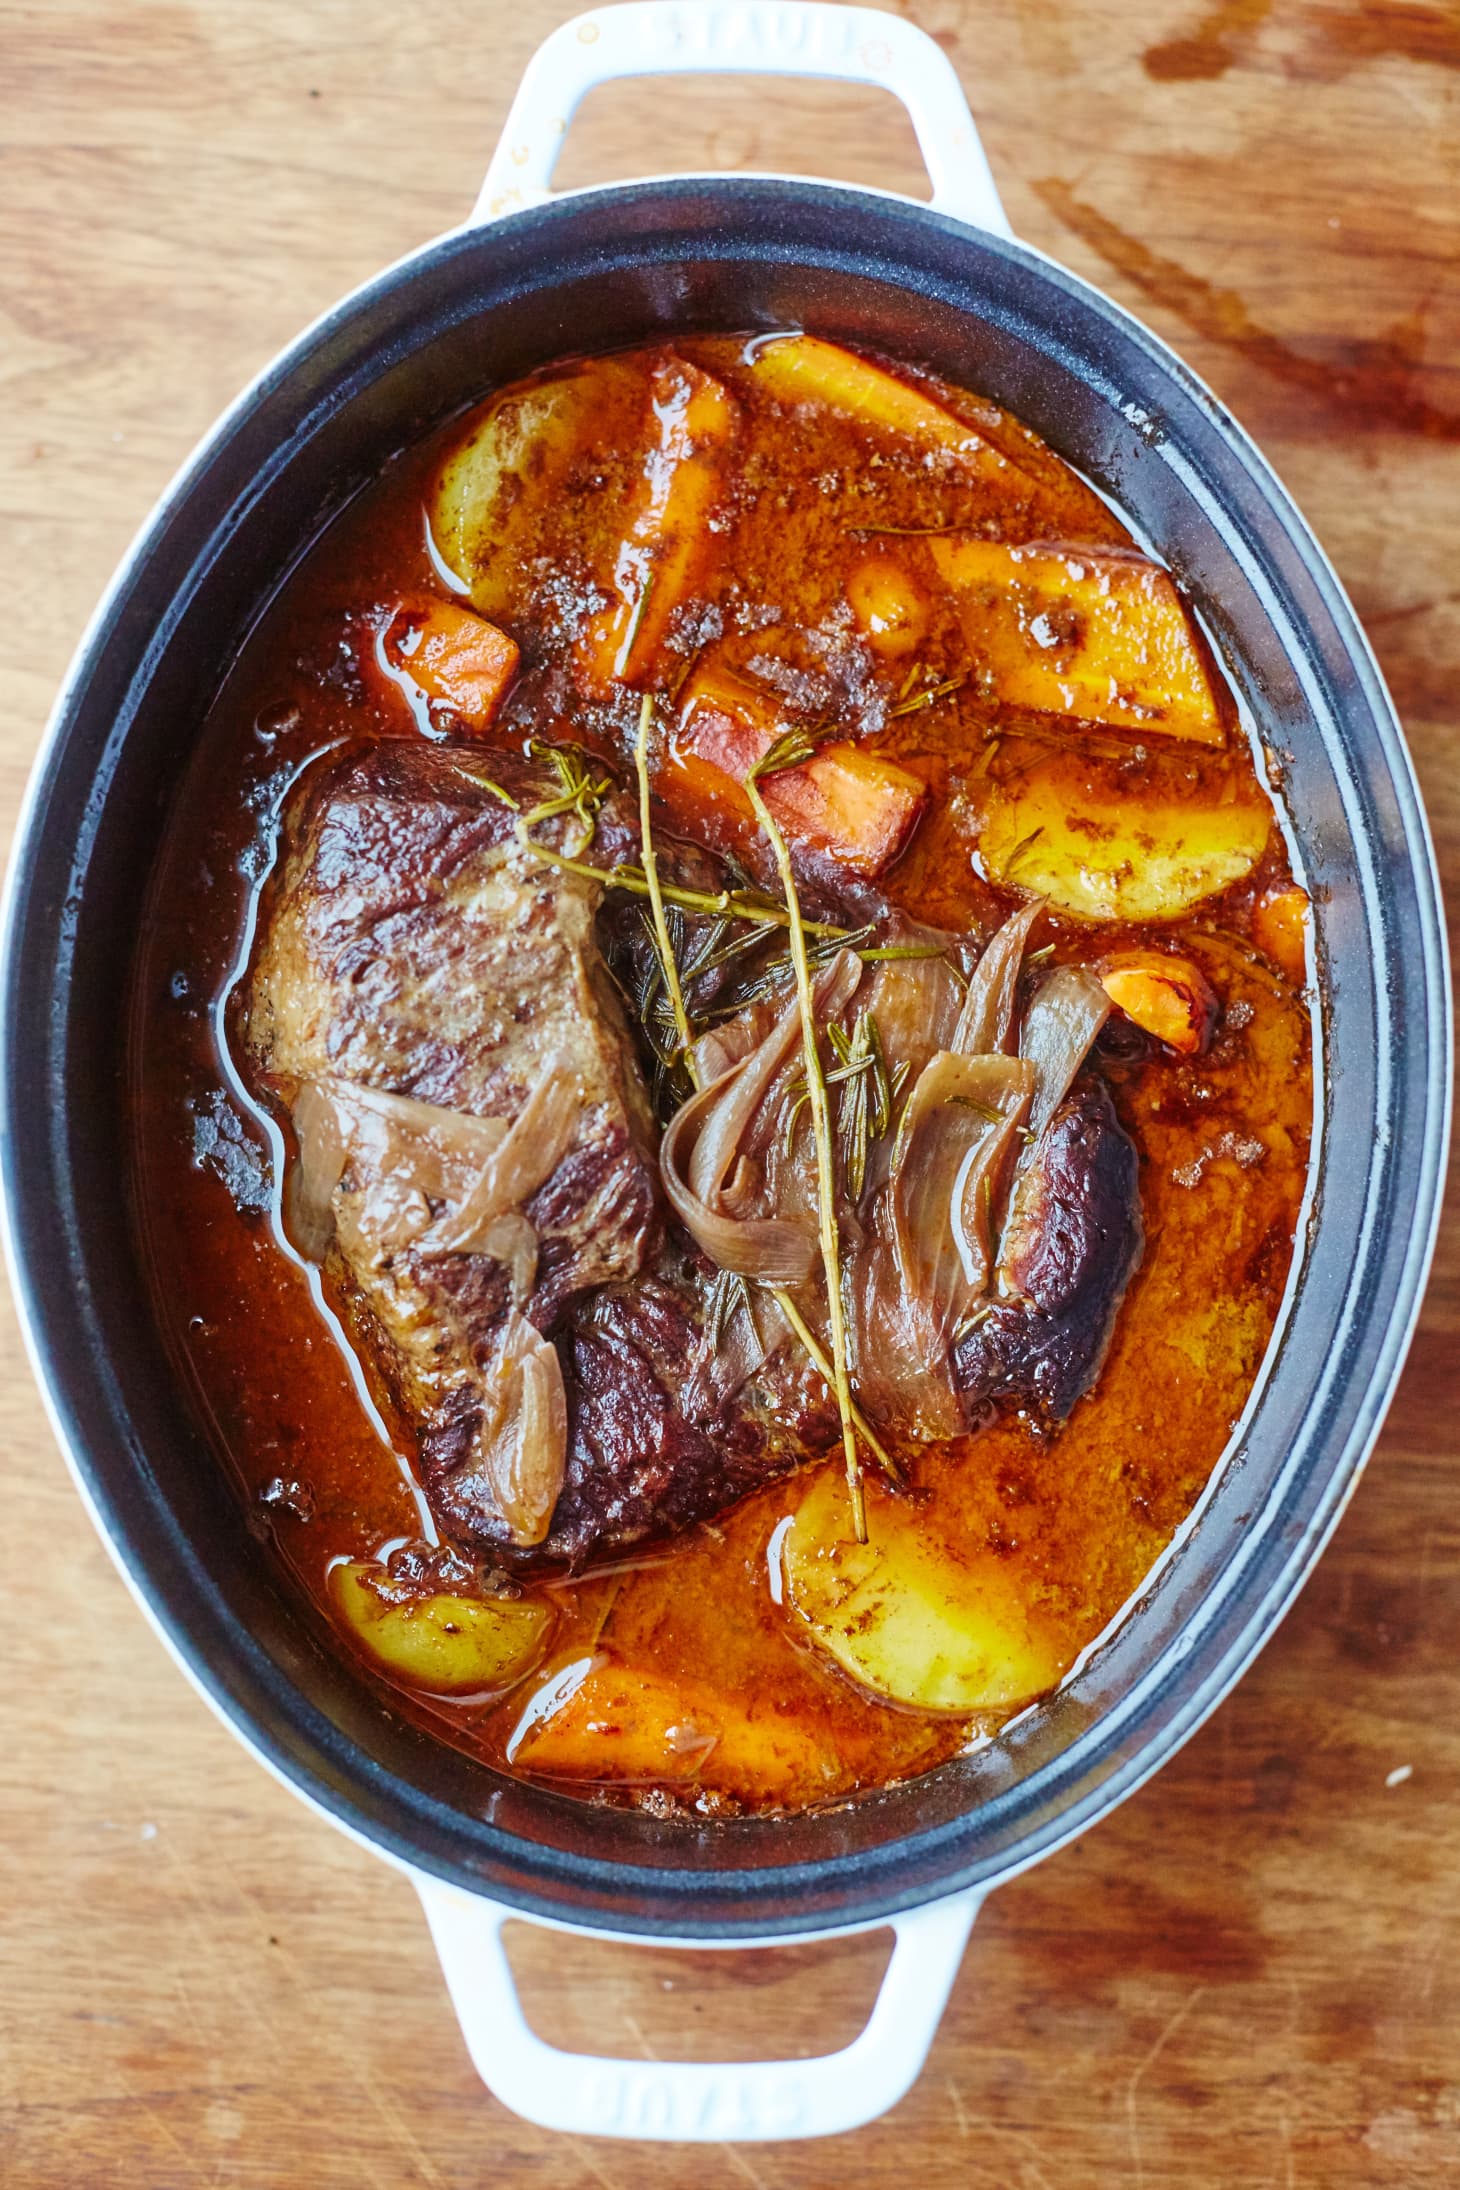 How To Cook Classic Beef Pot Roast in the Oven | Kitchn